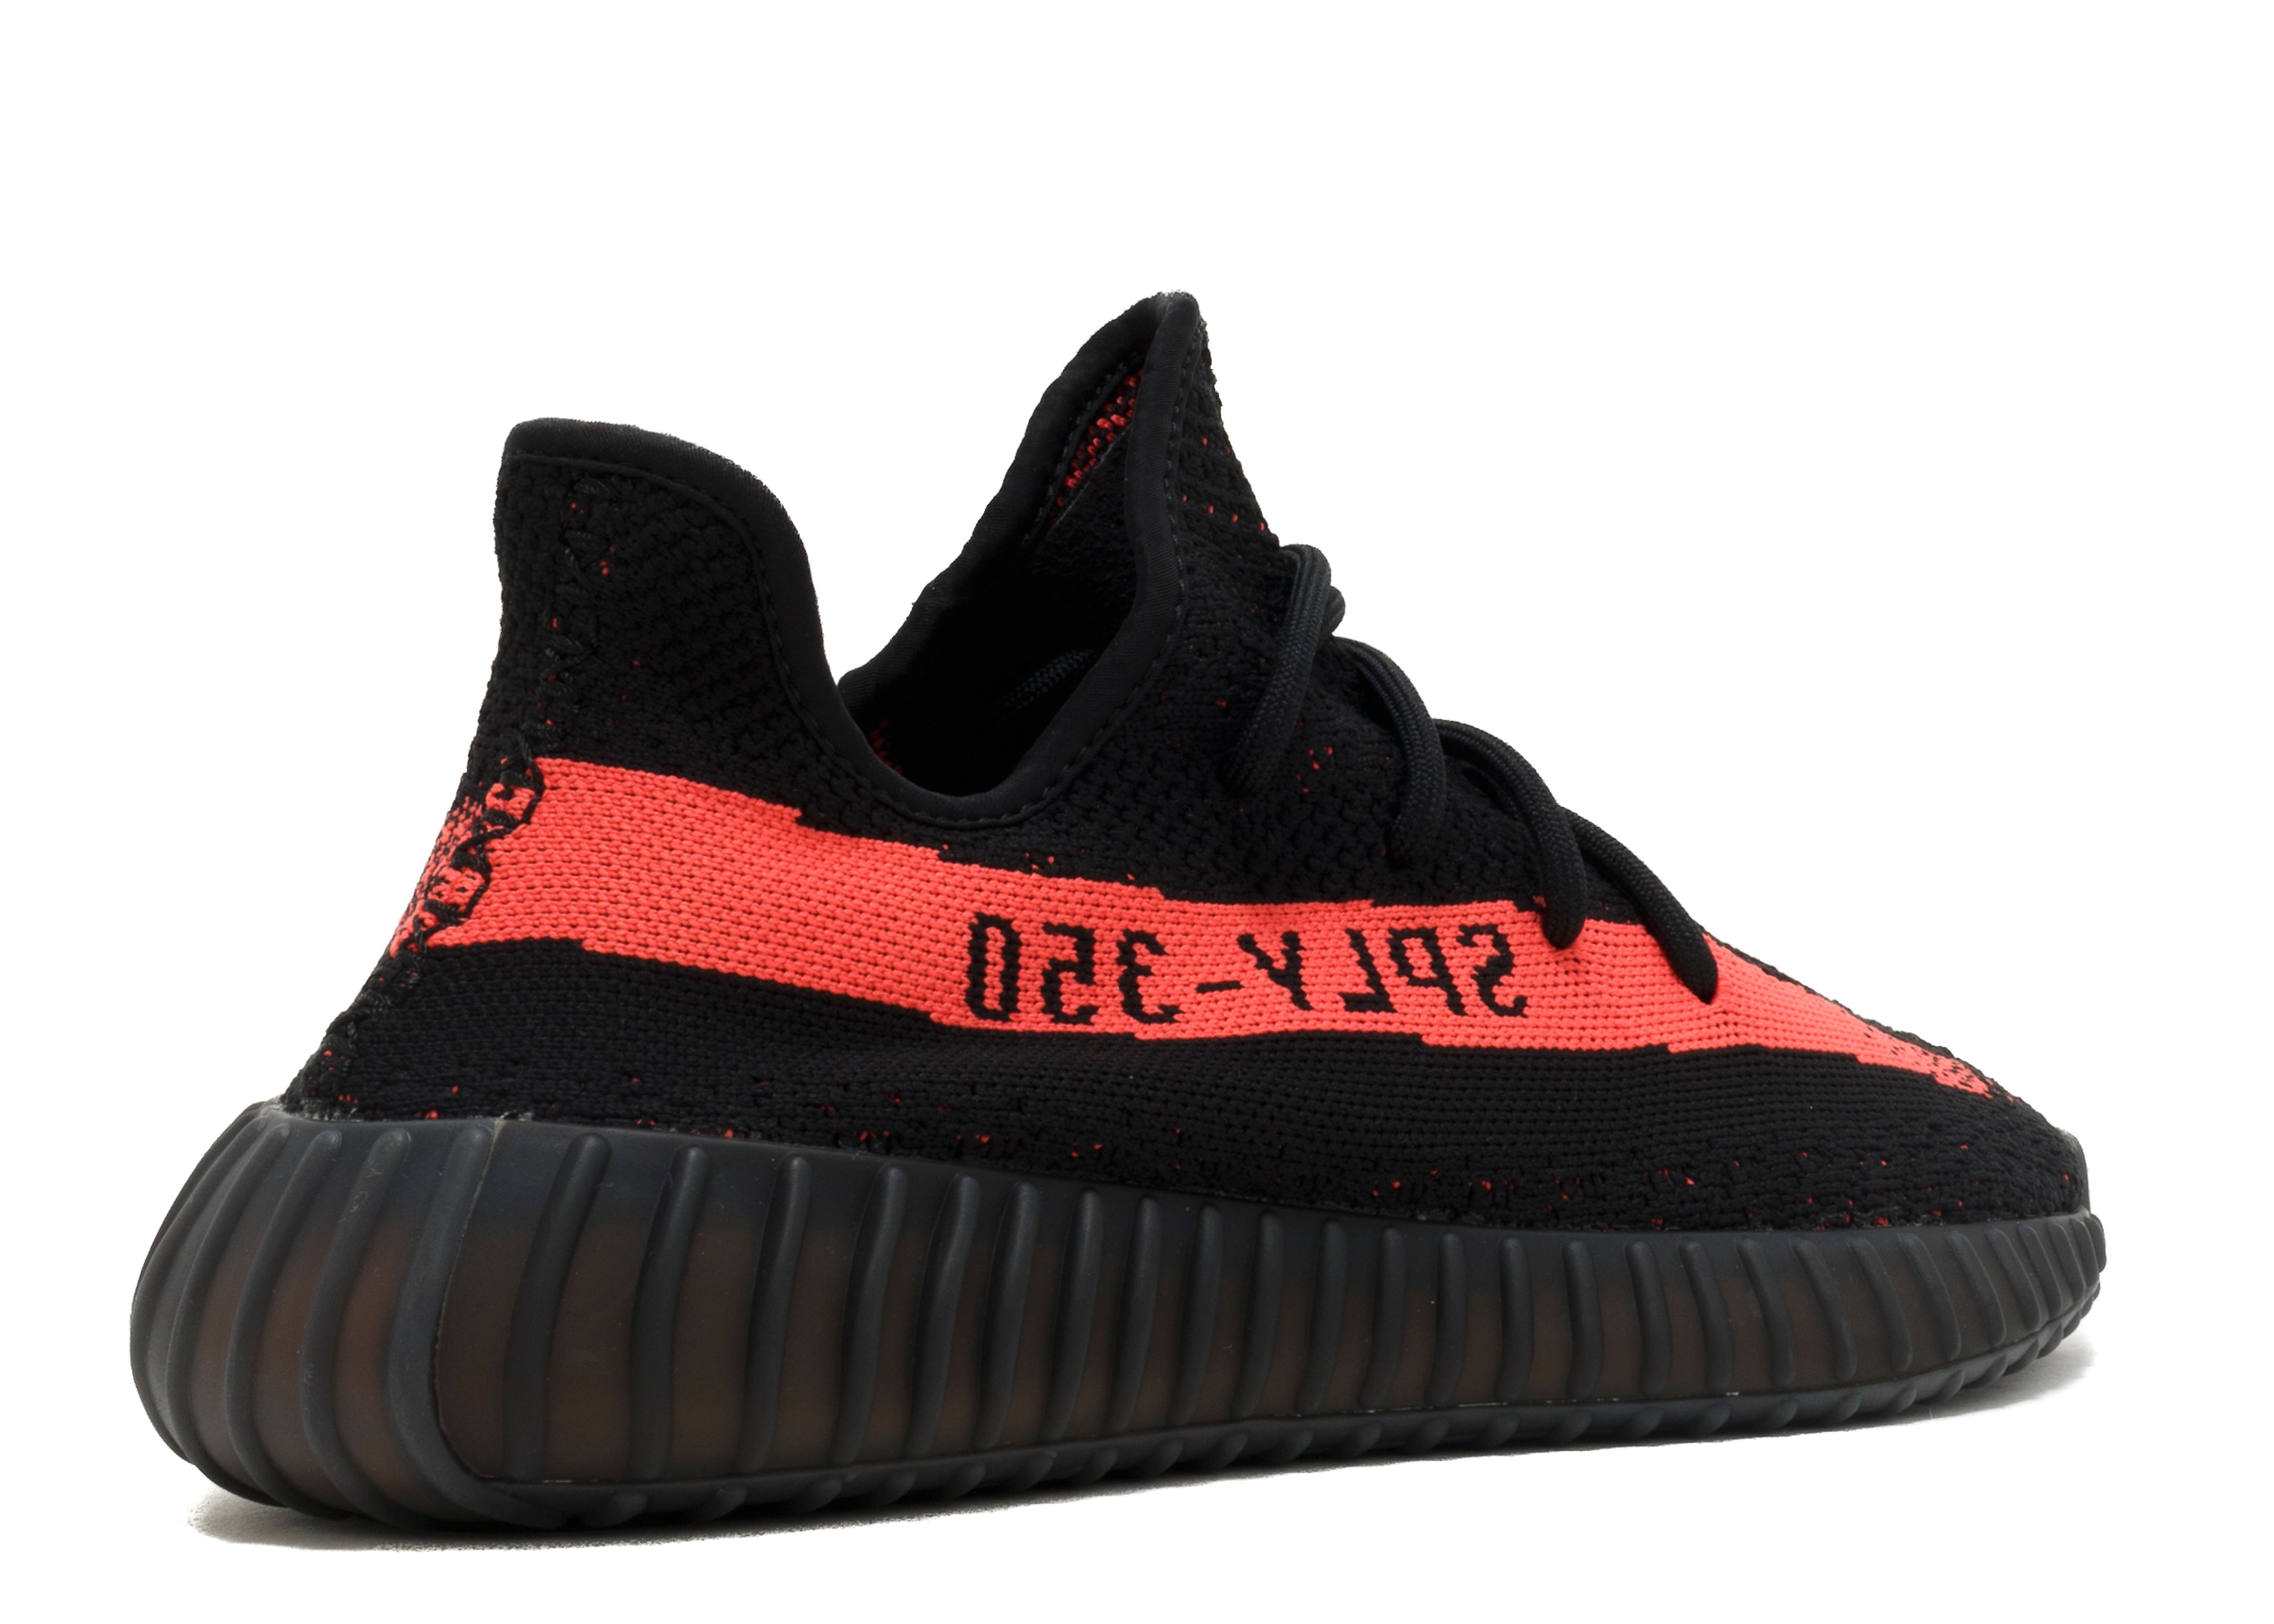 Shop Adidas yeezy boost 350 v2 'steel gray / solar red' Store 87% Off